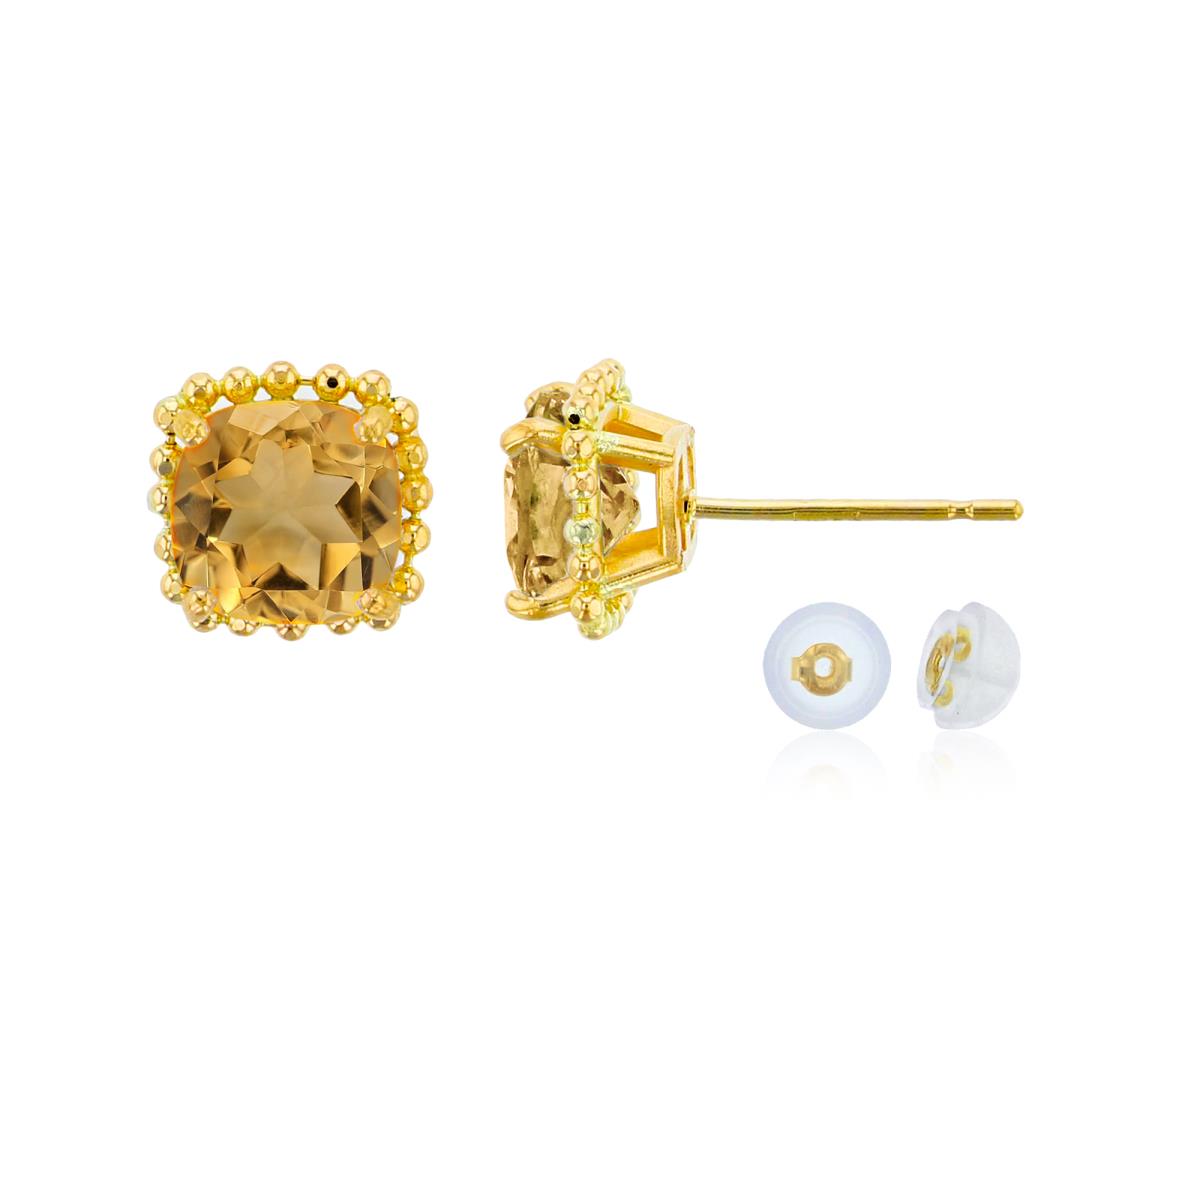 14K Yellow Gold 6x6mm Cushion Cut Citrine Bead Frame Stud Earring with Silicone Back